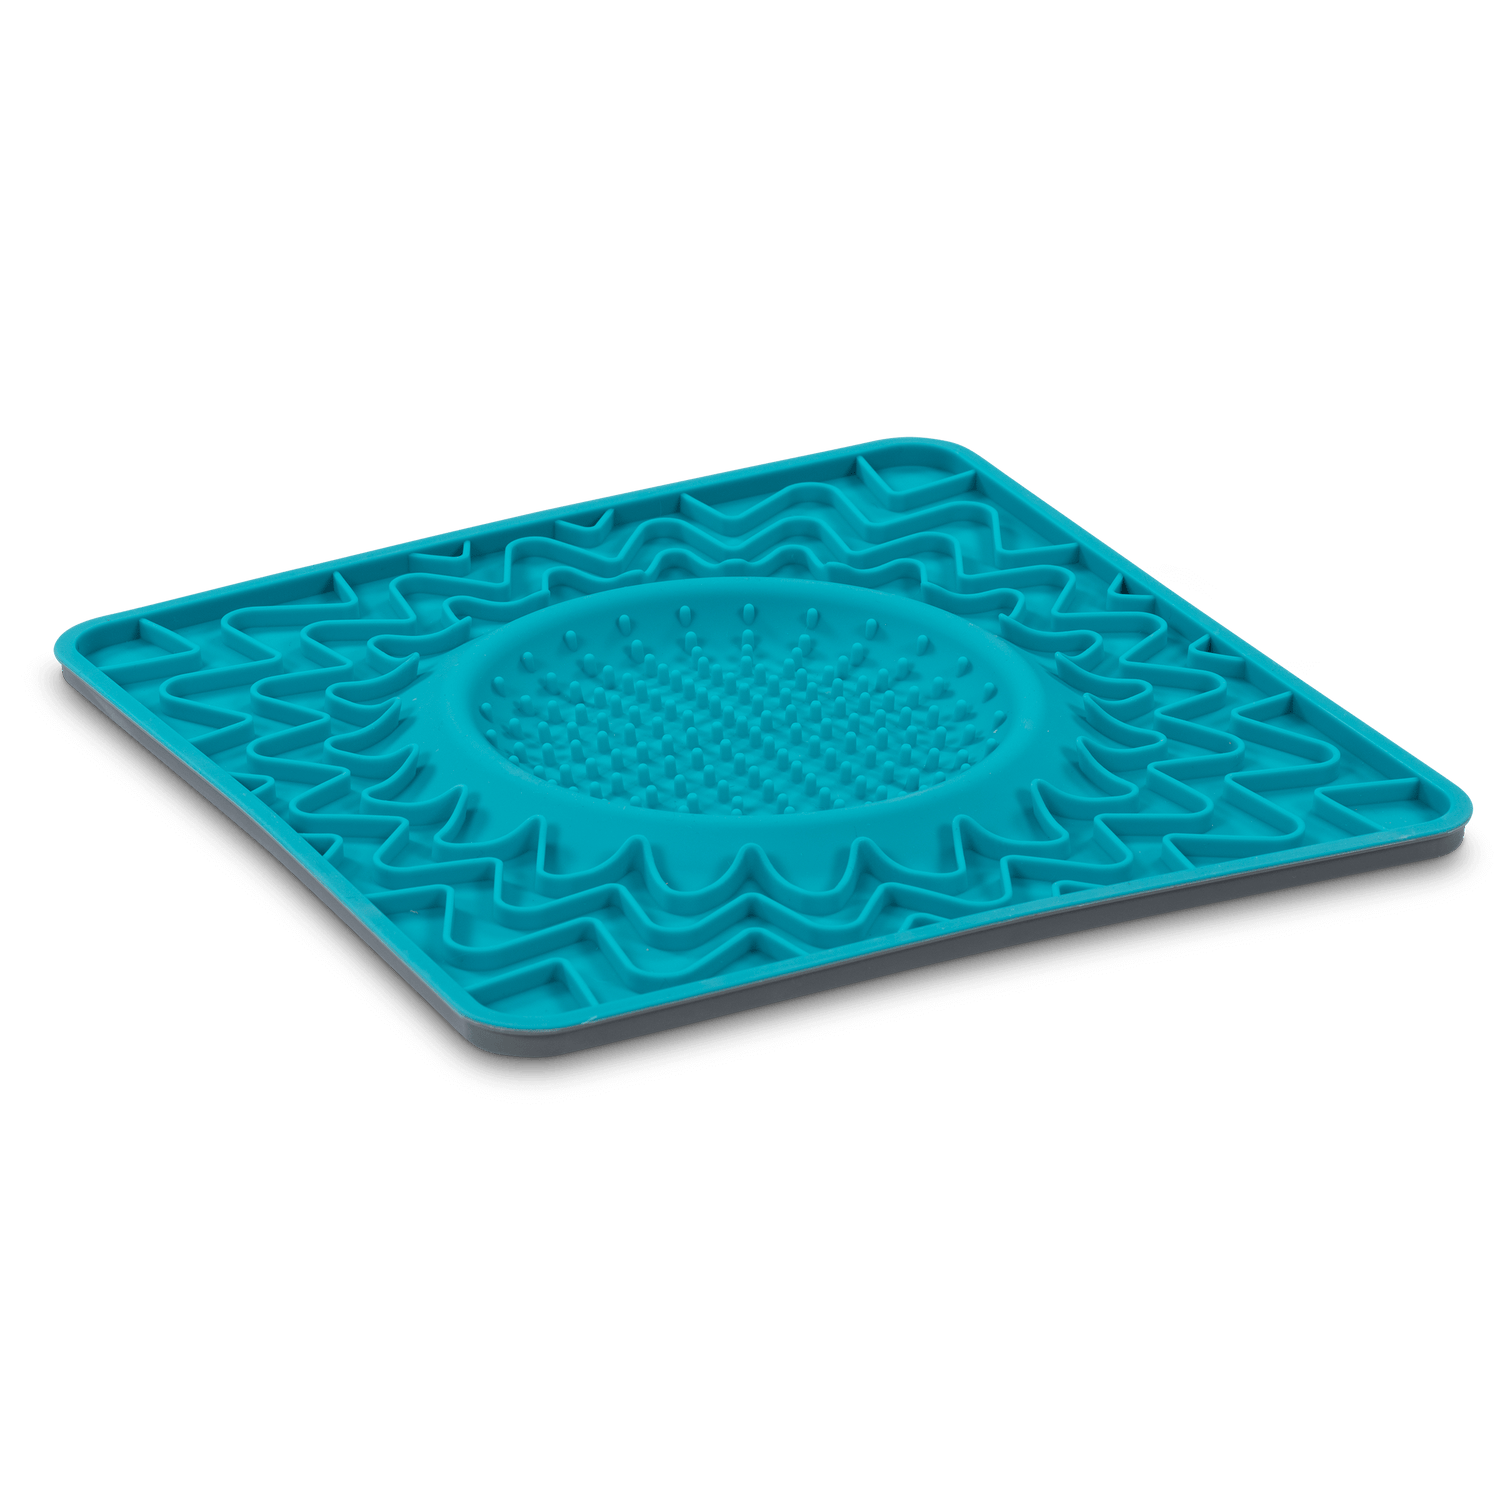 The sturdy frame makes for s spill resistant interactive lick mat. Spread your dogs favorite food.  The prolonged eating time also promotes the health benefits of licking. 